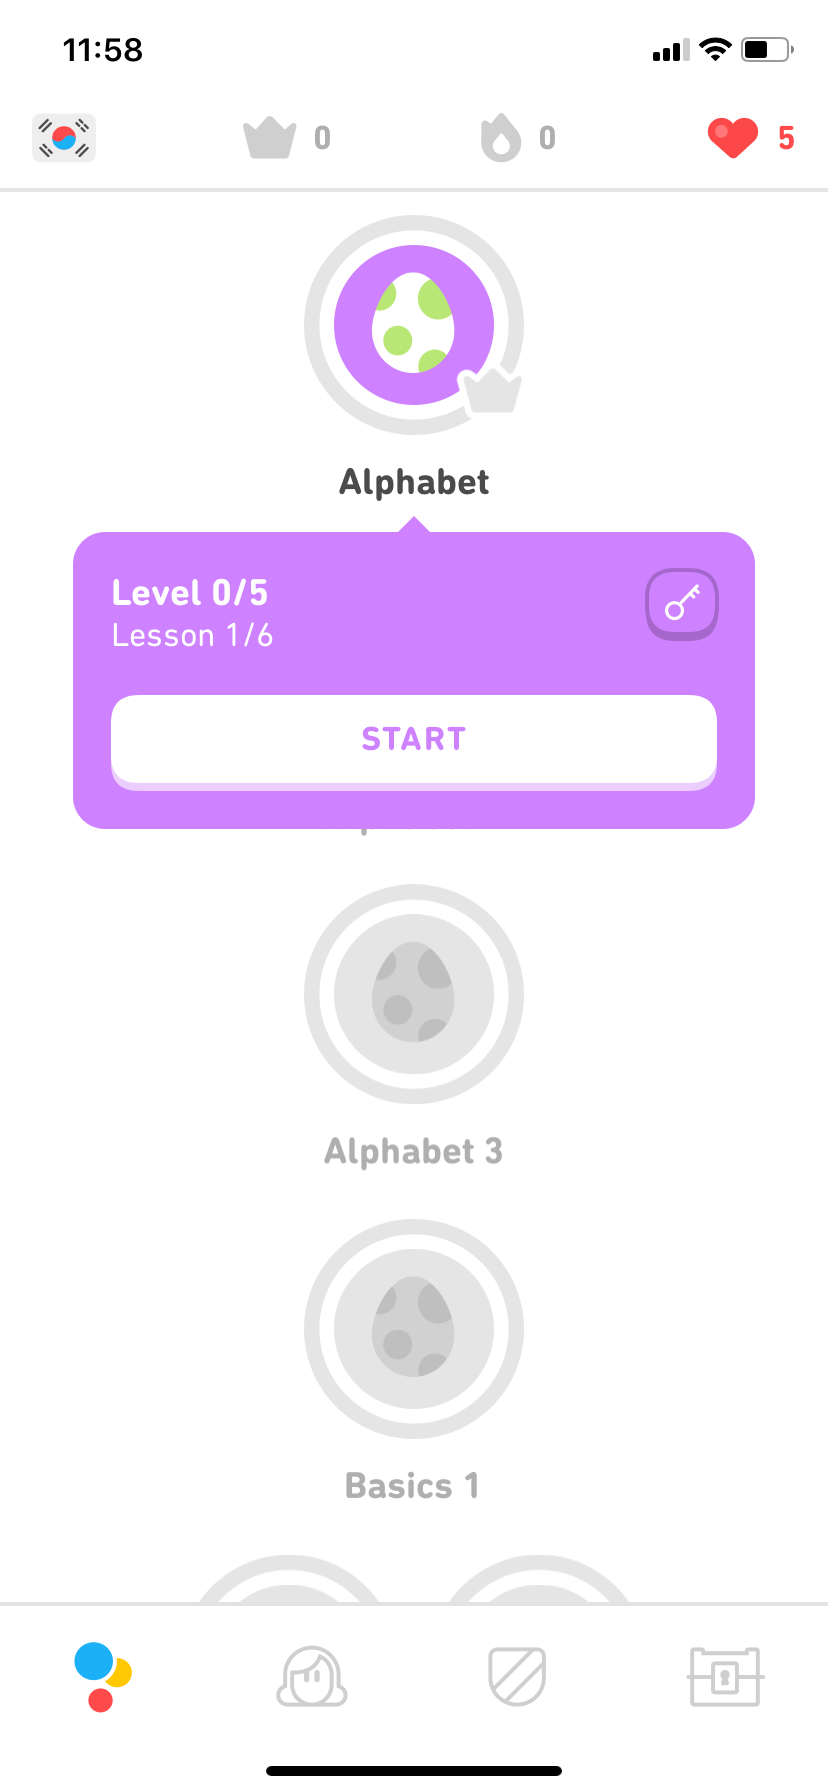 Screenshot of a brand new start with the app, where the user can select his first level to try out